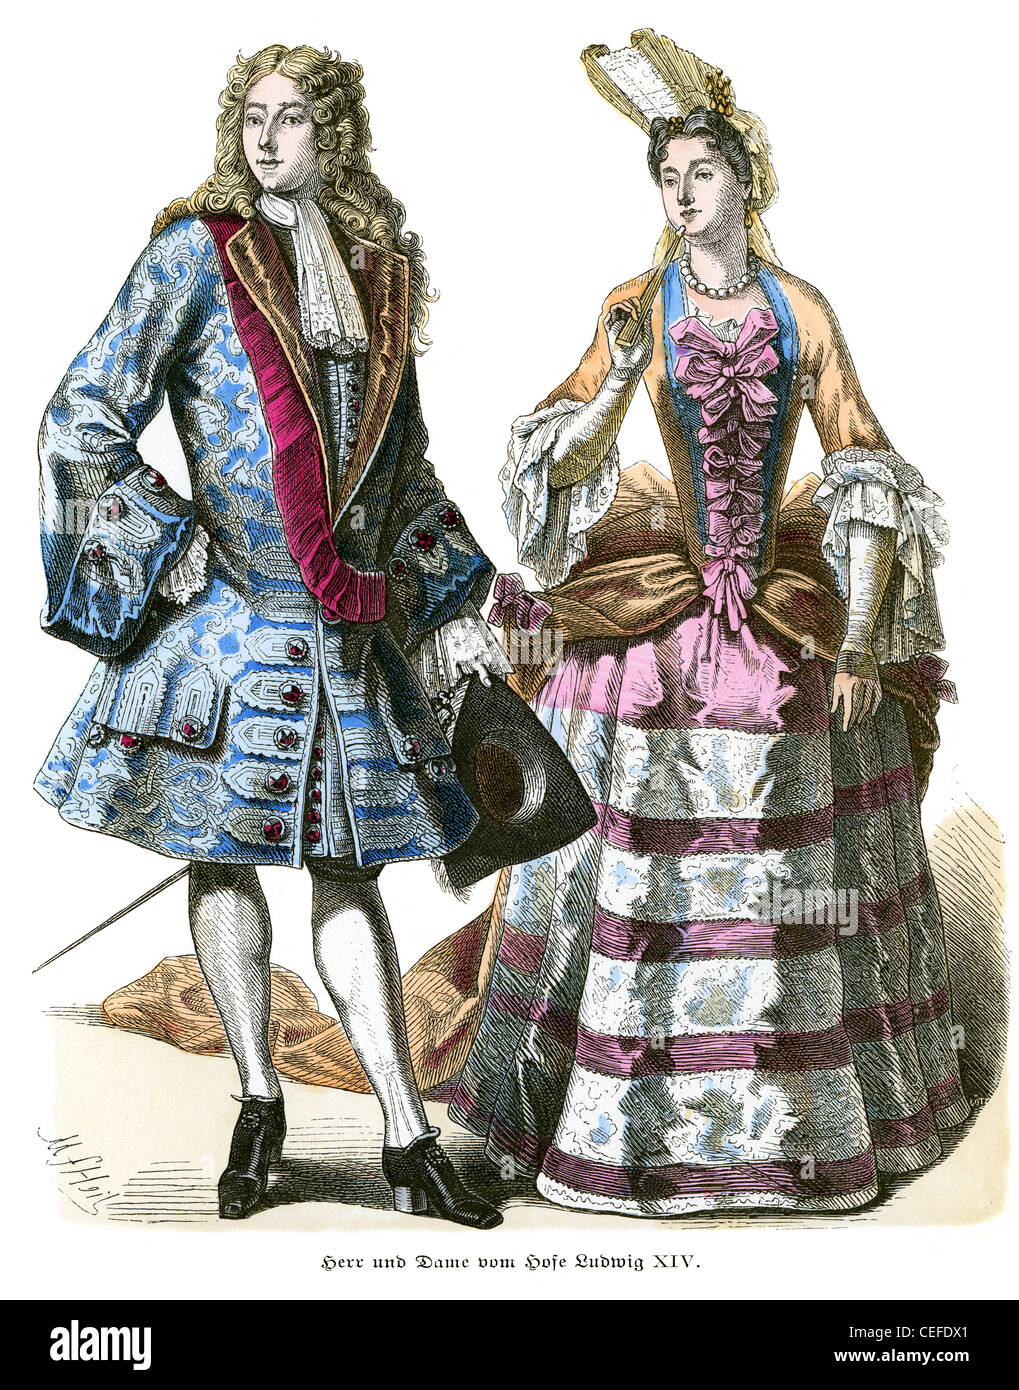 Lord and lady of the reign of Louis XIV of France Stock Photo: 43366121 - Alamy